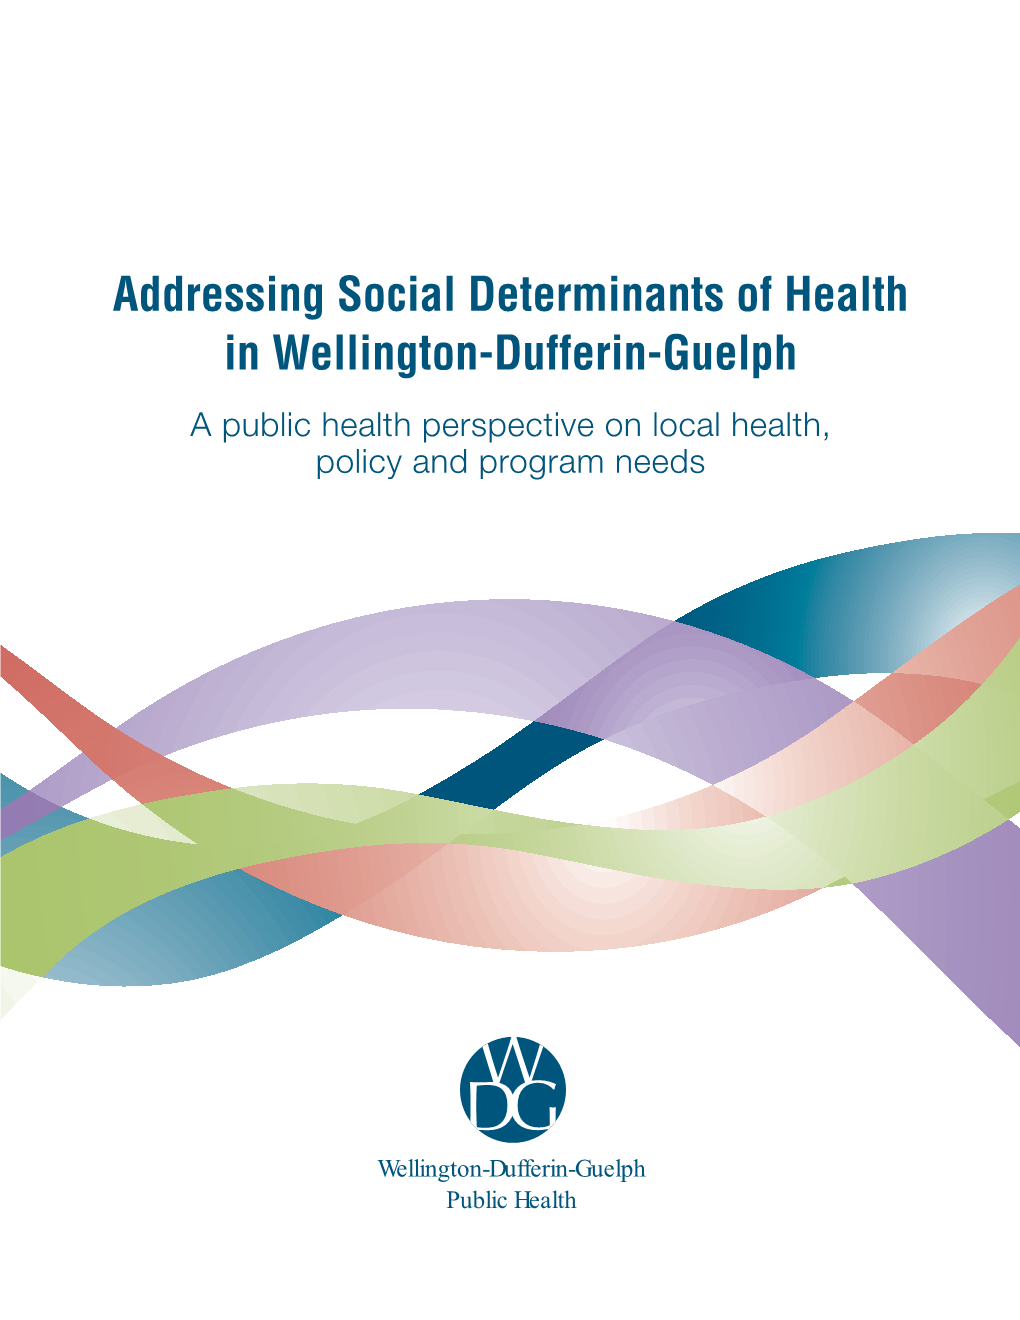 Addressing Social Determinants of Health in Wellington-Dufferin-Guelph a Public Health Perspective on Local Health, Policy and Program Needs